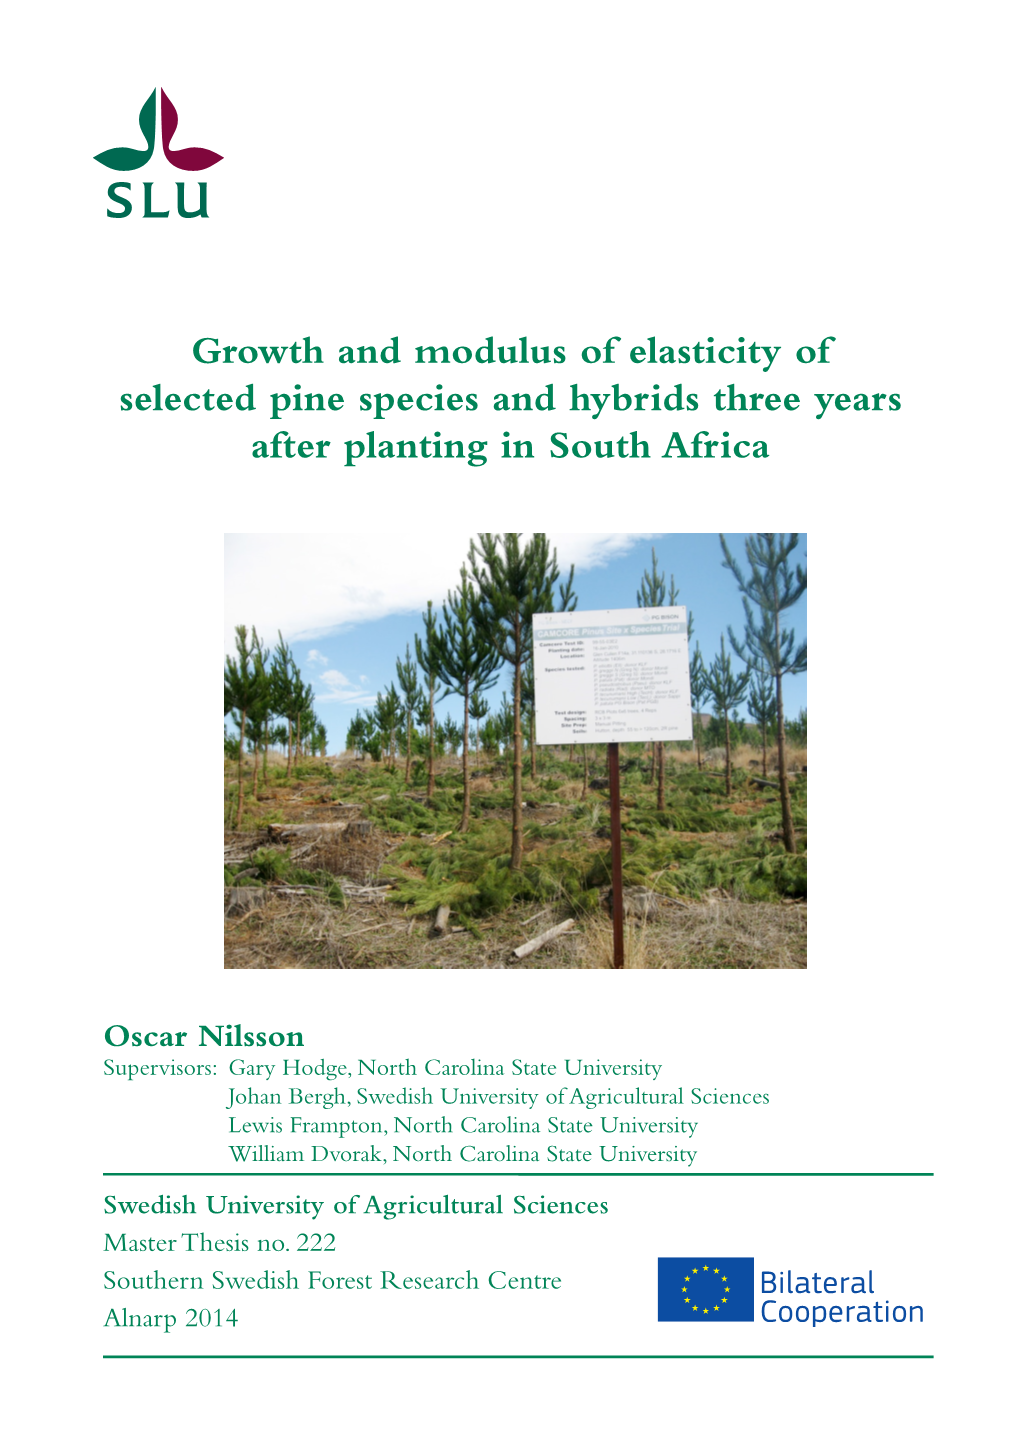 Growth and Modulus of Elasticity of Selected Pine Species and Hybrids Three Years After Planting in South Africa